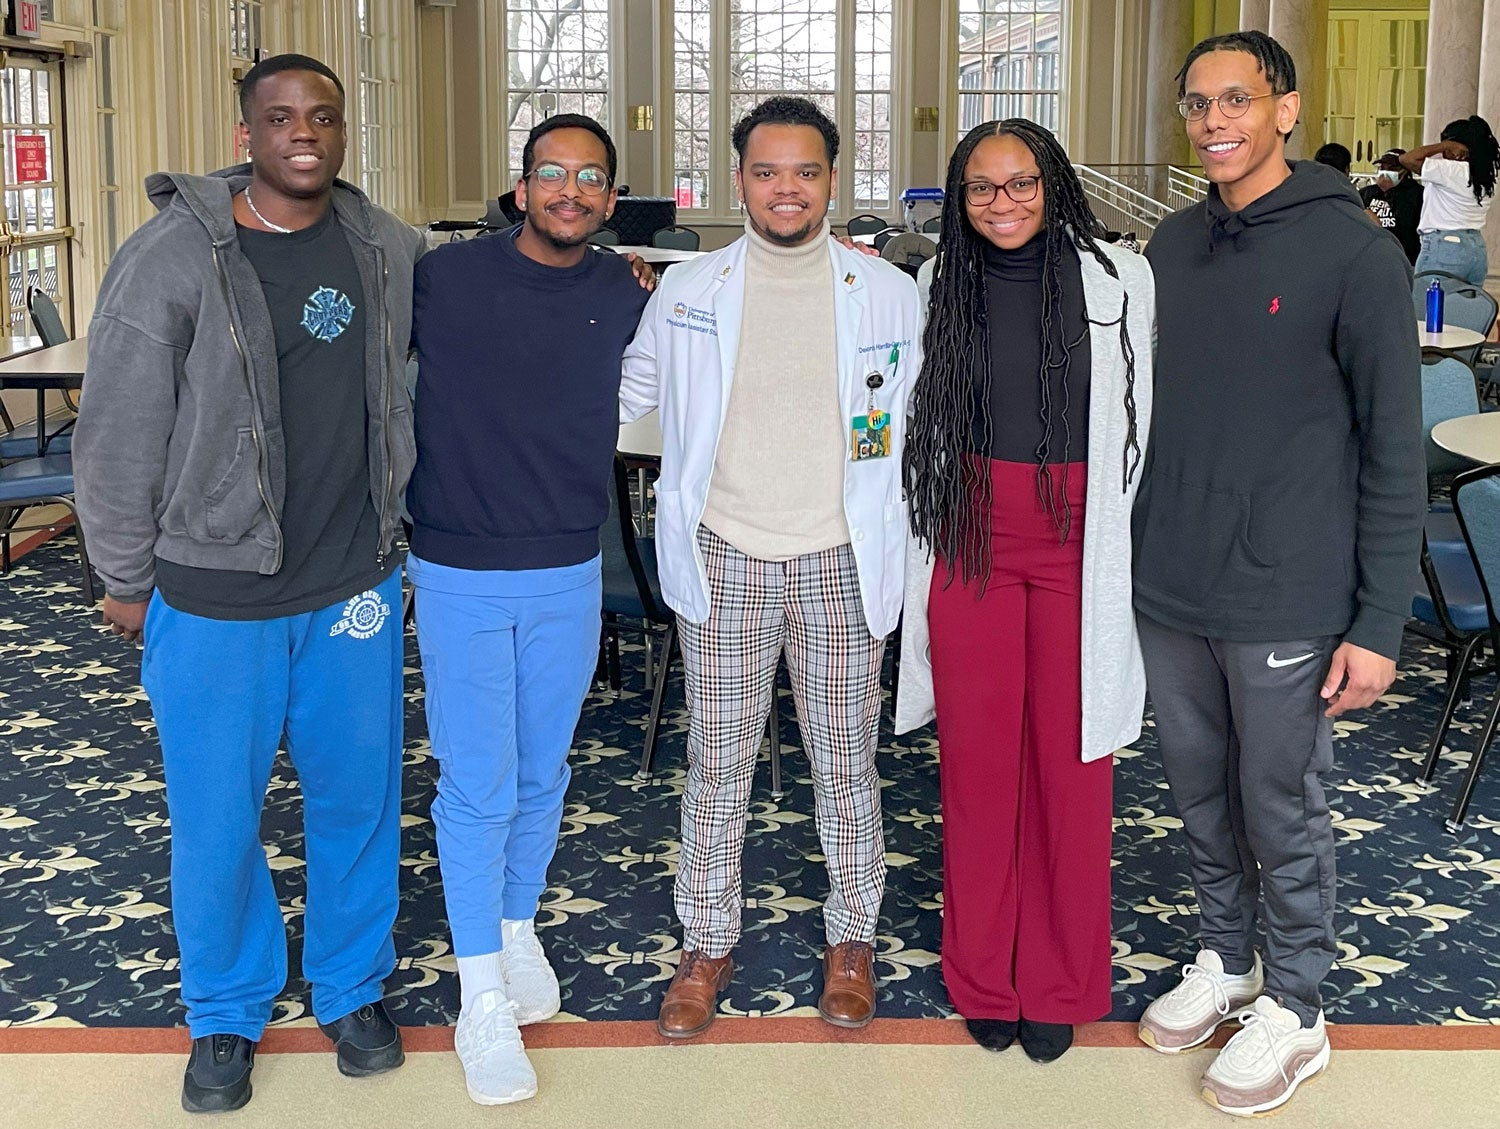 Pictured left to right: Second-year School of Medicine student Crandall Jones, Doctor of Dental Medicine student Thomas Fekeru, second-year Department of Physician Assistant Studies student Deionte Harrilla-Gray, Department of Occupational Therapy student Whitney Martin, first-year Department of Physician Assistant Studies student Malachi Perez